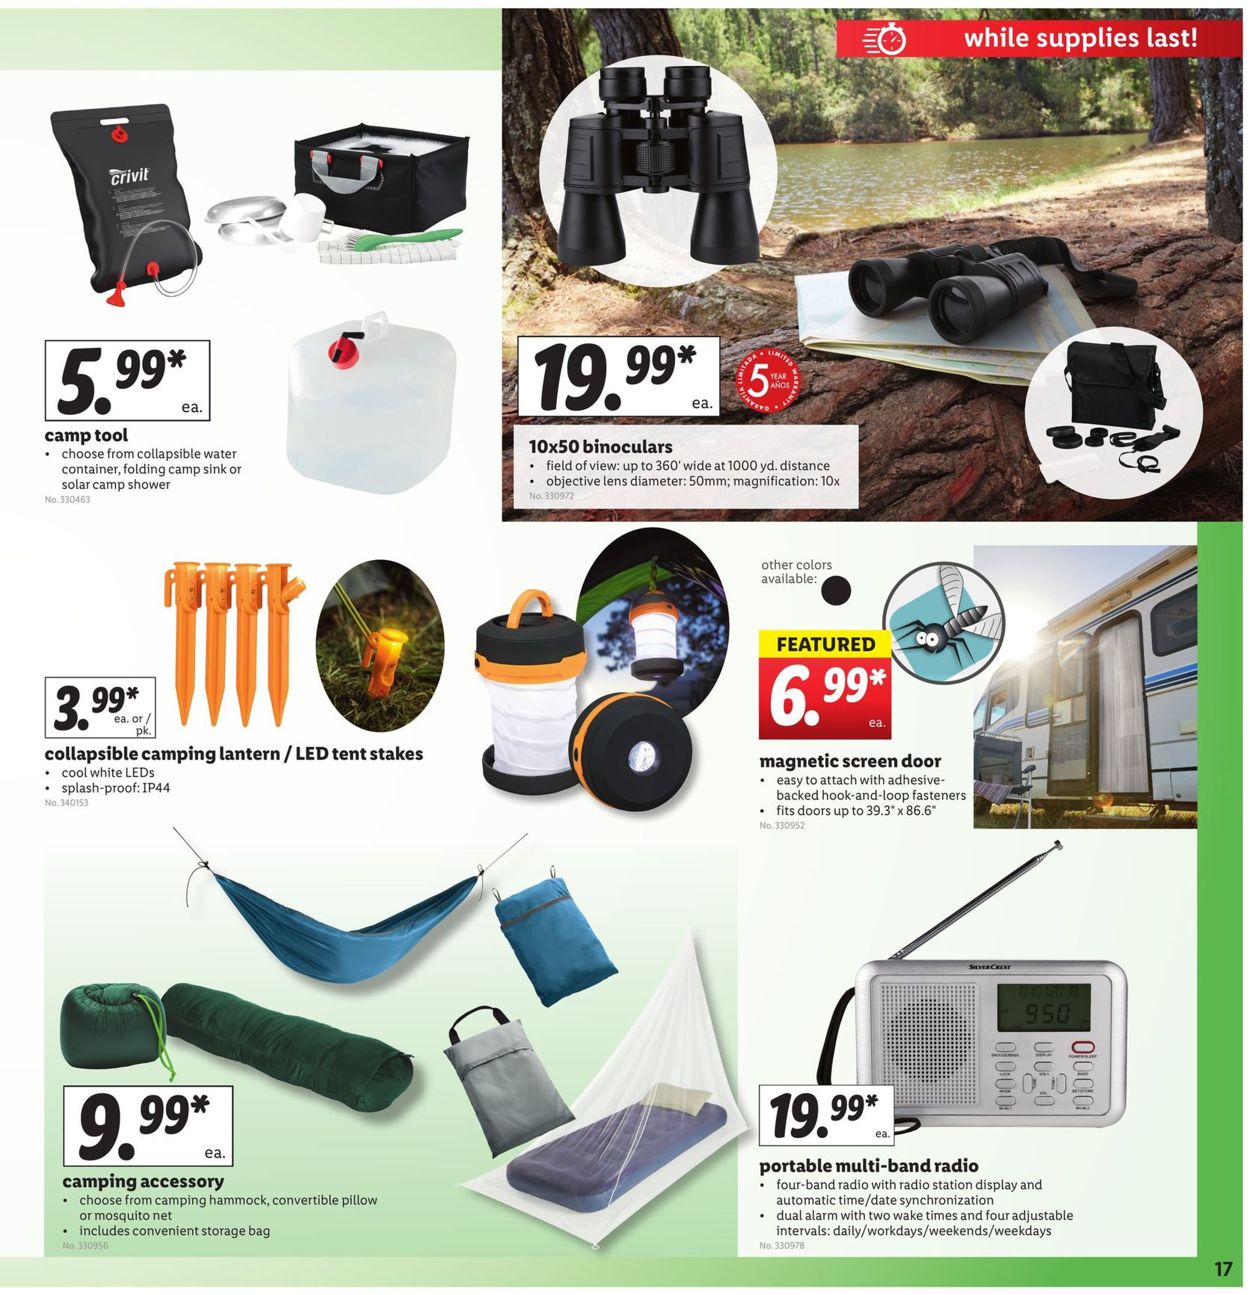 Catalogue Lidl from 06/03/2020